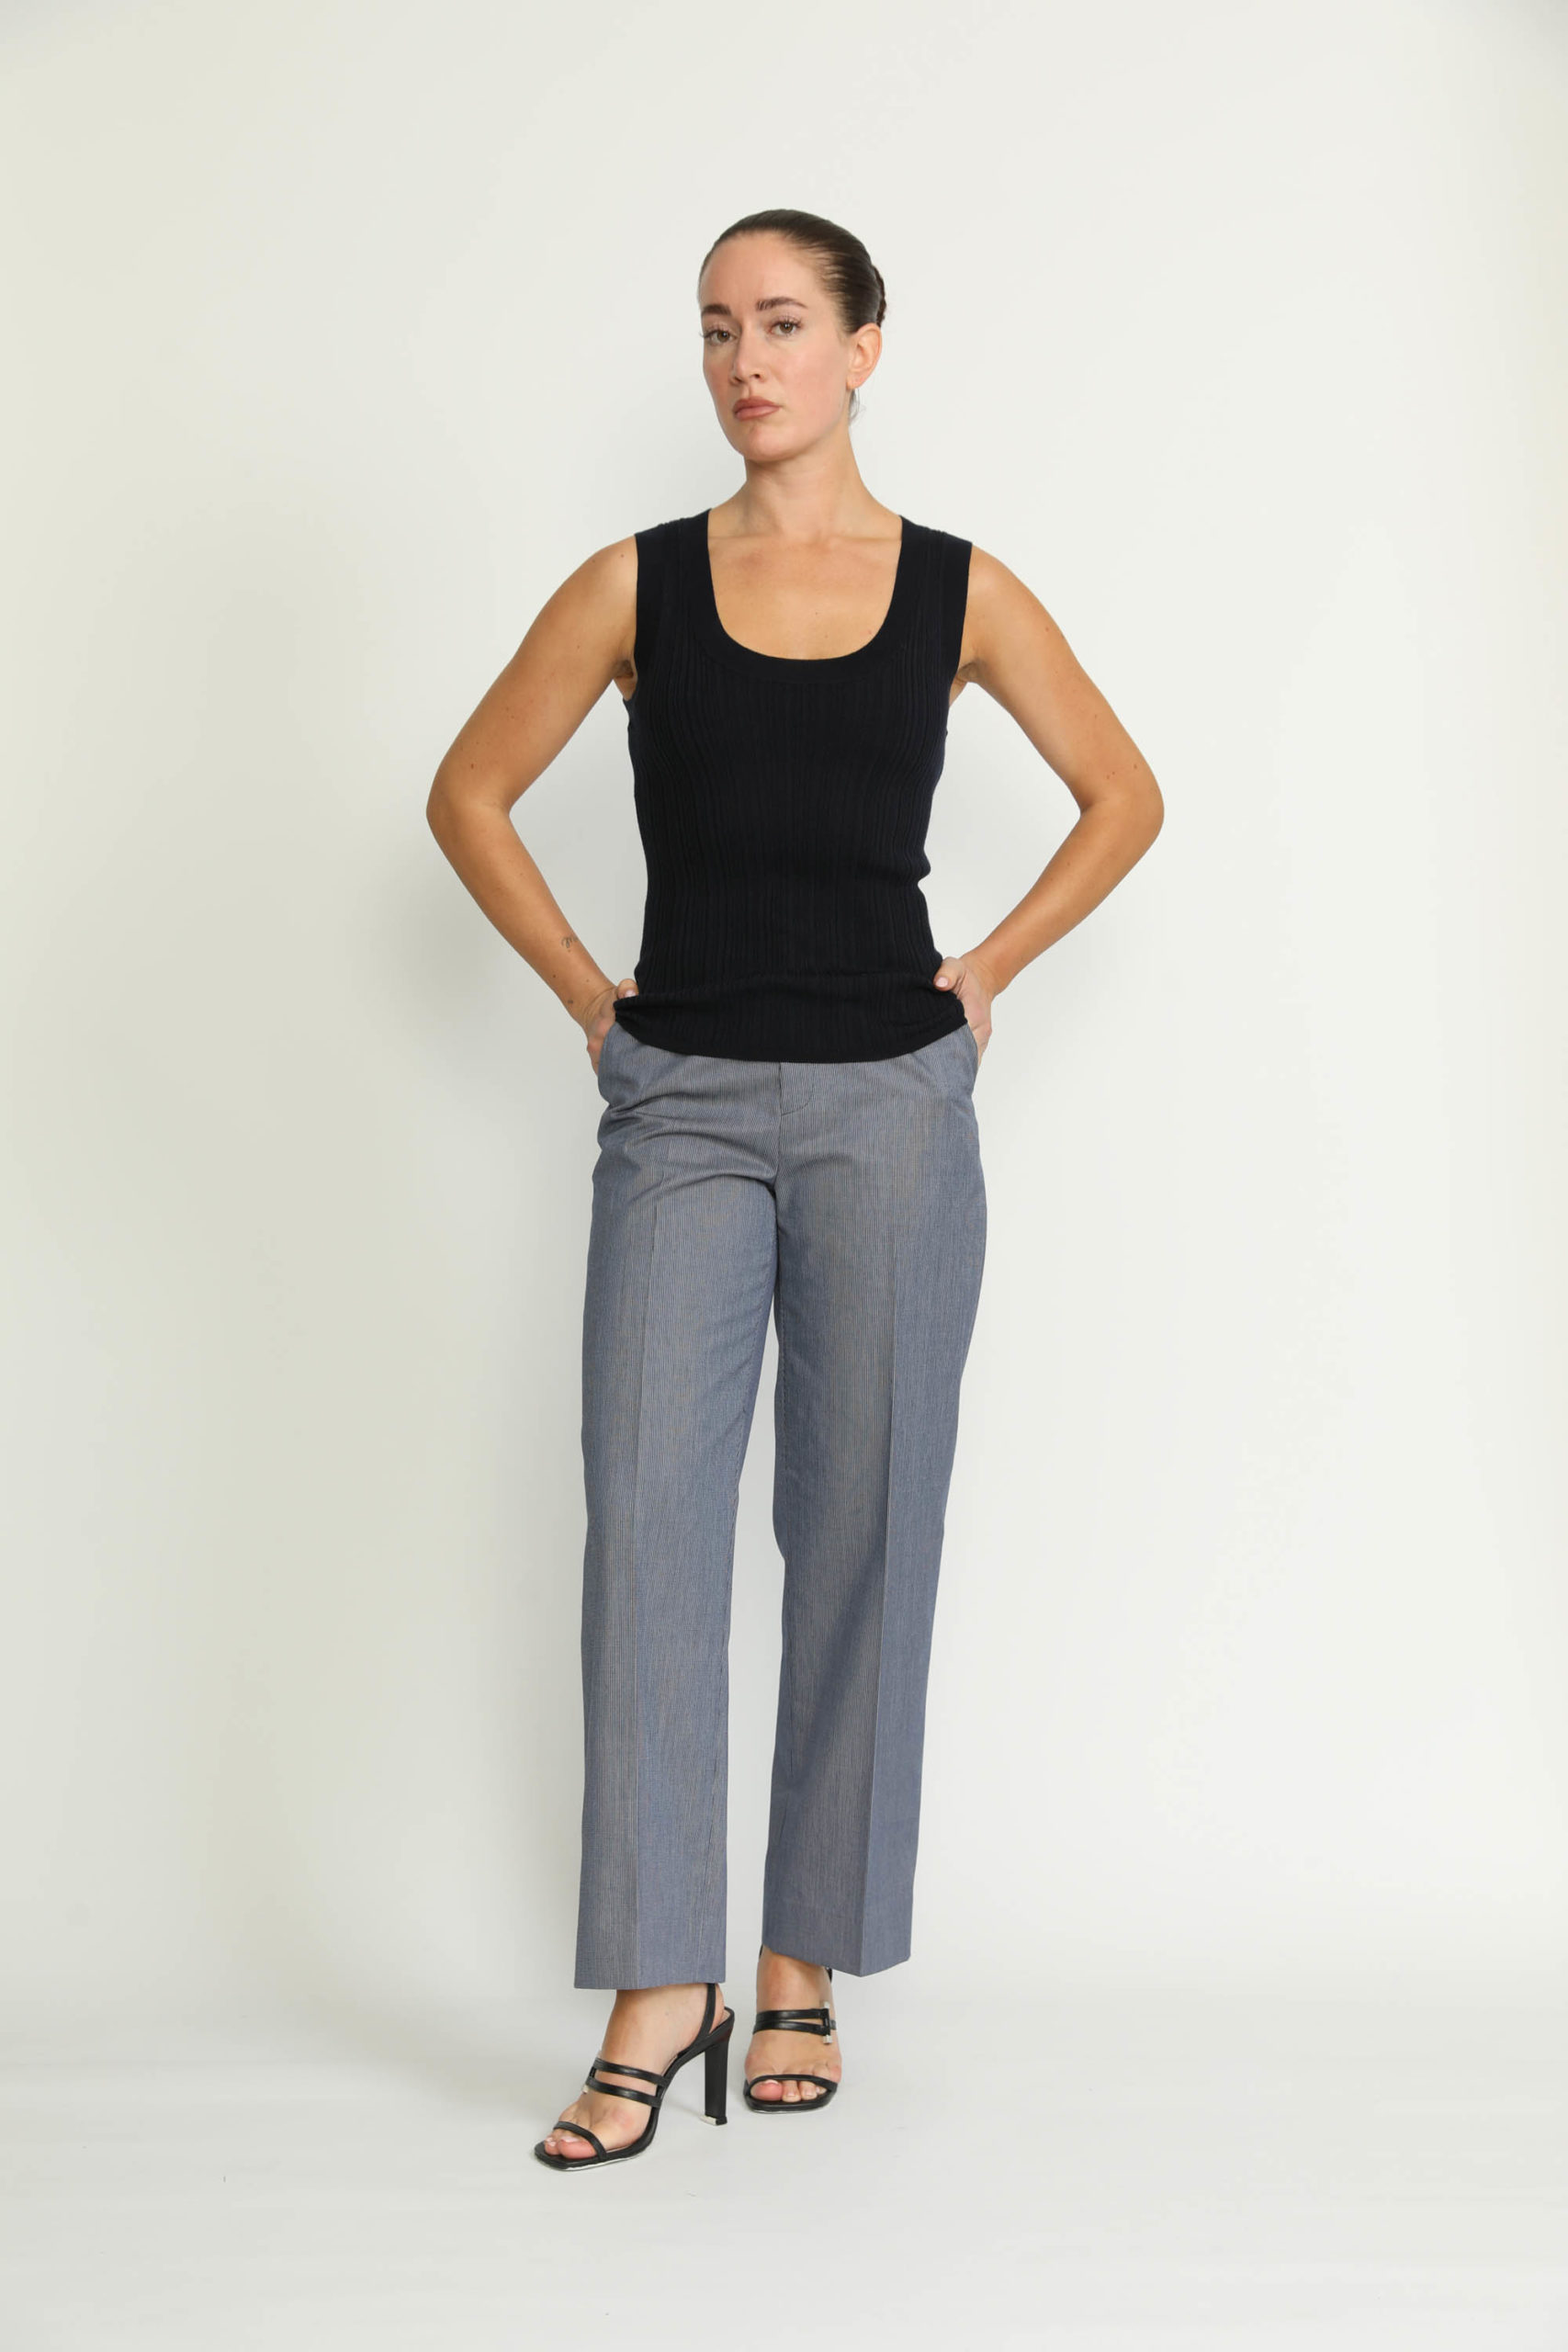 Manchester Trousers – Manchester High-Waisted Denim Blue Pinstripe Trousers